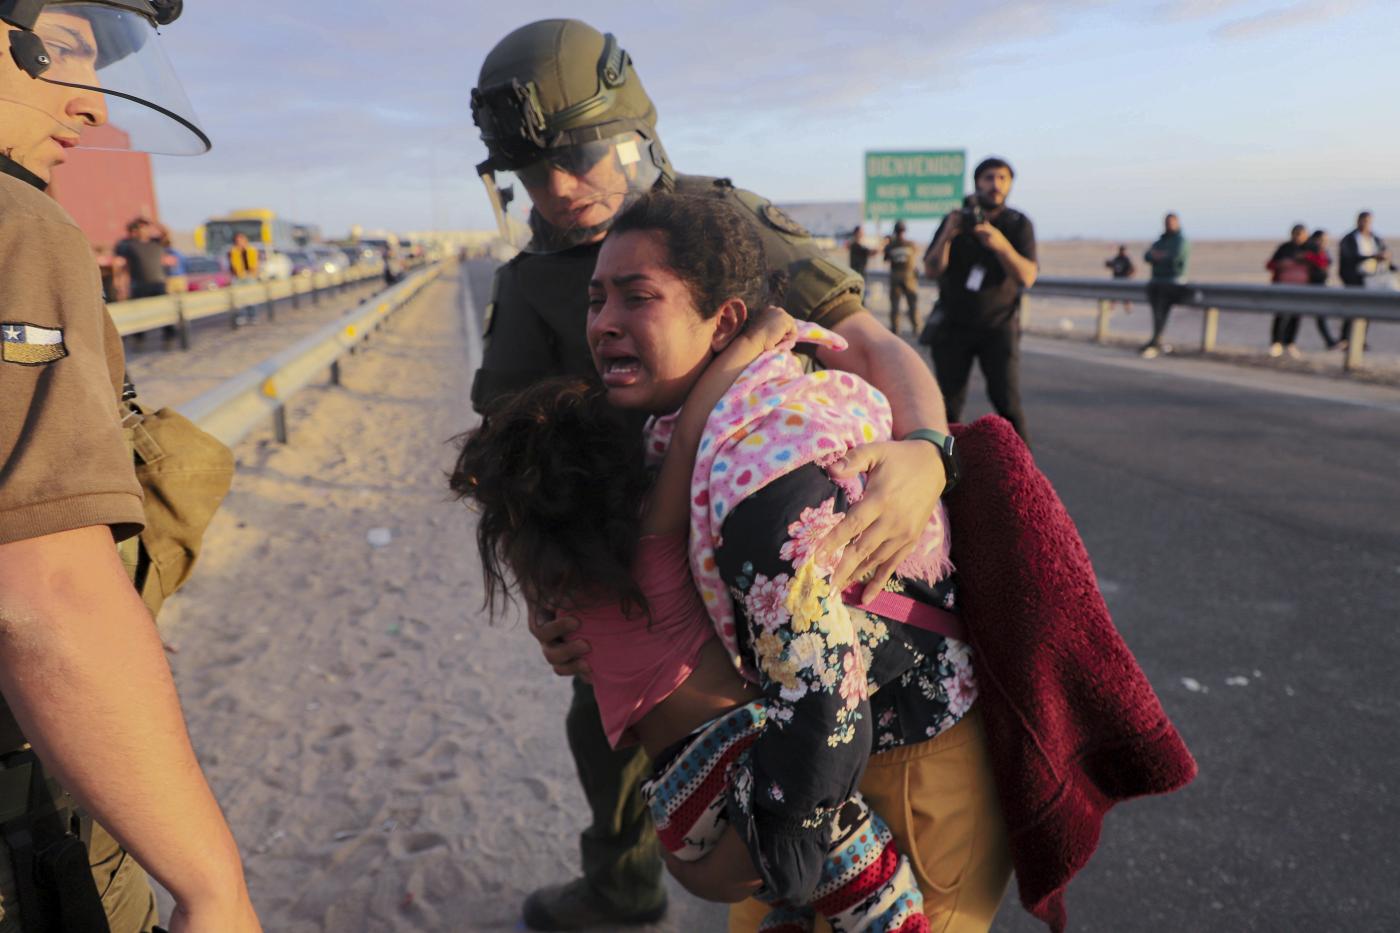 A migrant is detained by Chilean Police as she blocked the highway on the Chile-Peru border, near Arica, Chile, Tuesday, May 2, 2023. A migration crisis at the border between Chile and Peru has intensified as migrants who claim the want to go home remained stranded, unable to enter Peru. (AP Photo/Agustin Mercado)

Associated Press/LaPresse
Only Italy and Spain